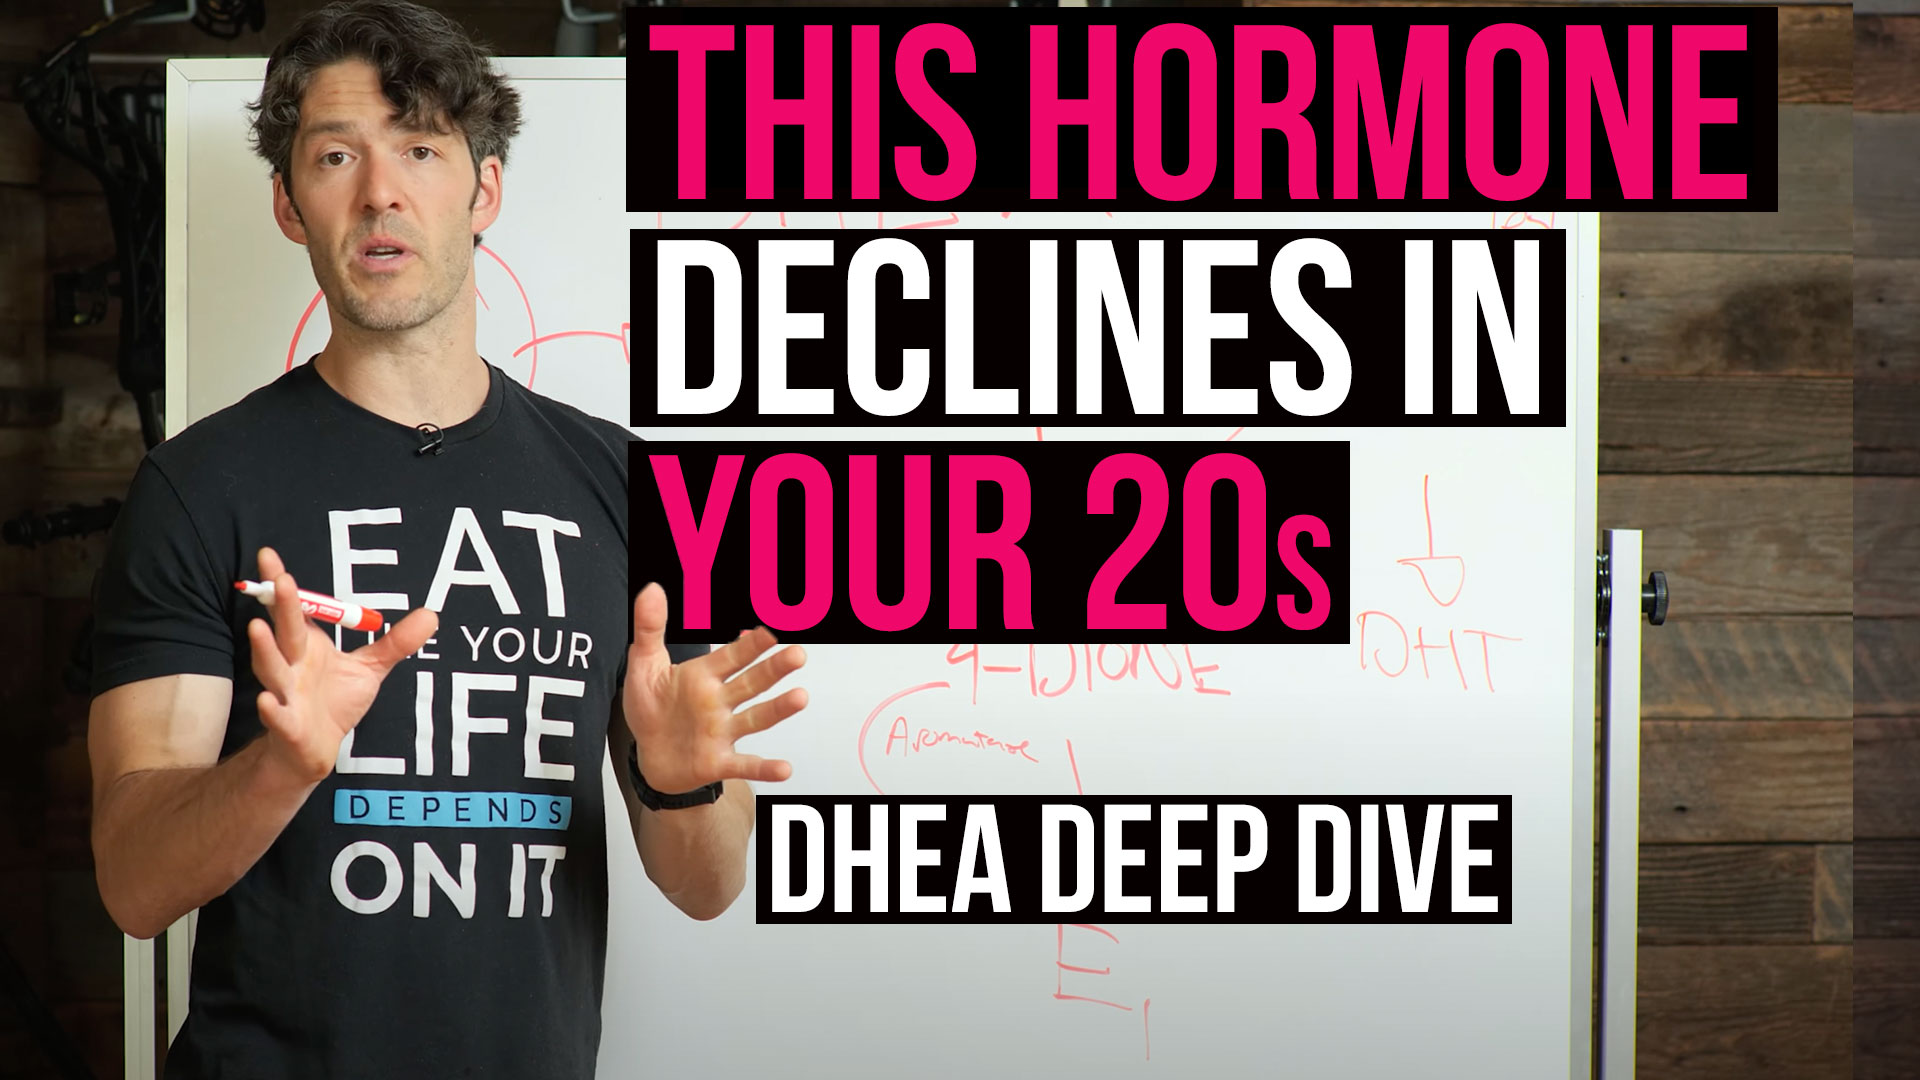 Low Levels of the Hormone DHEA are Linked with Higher Belly Fat in Women